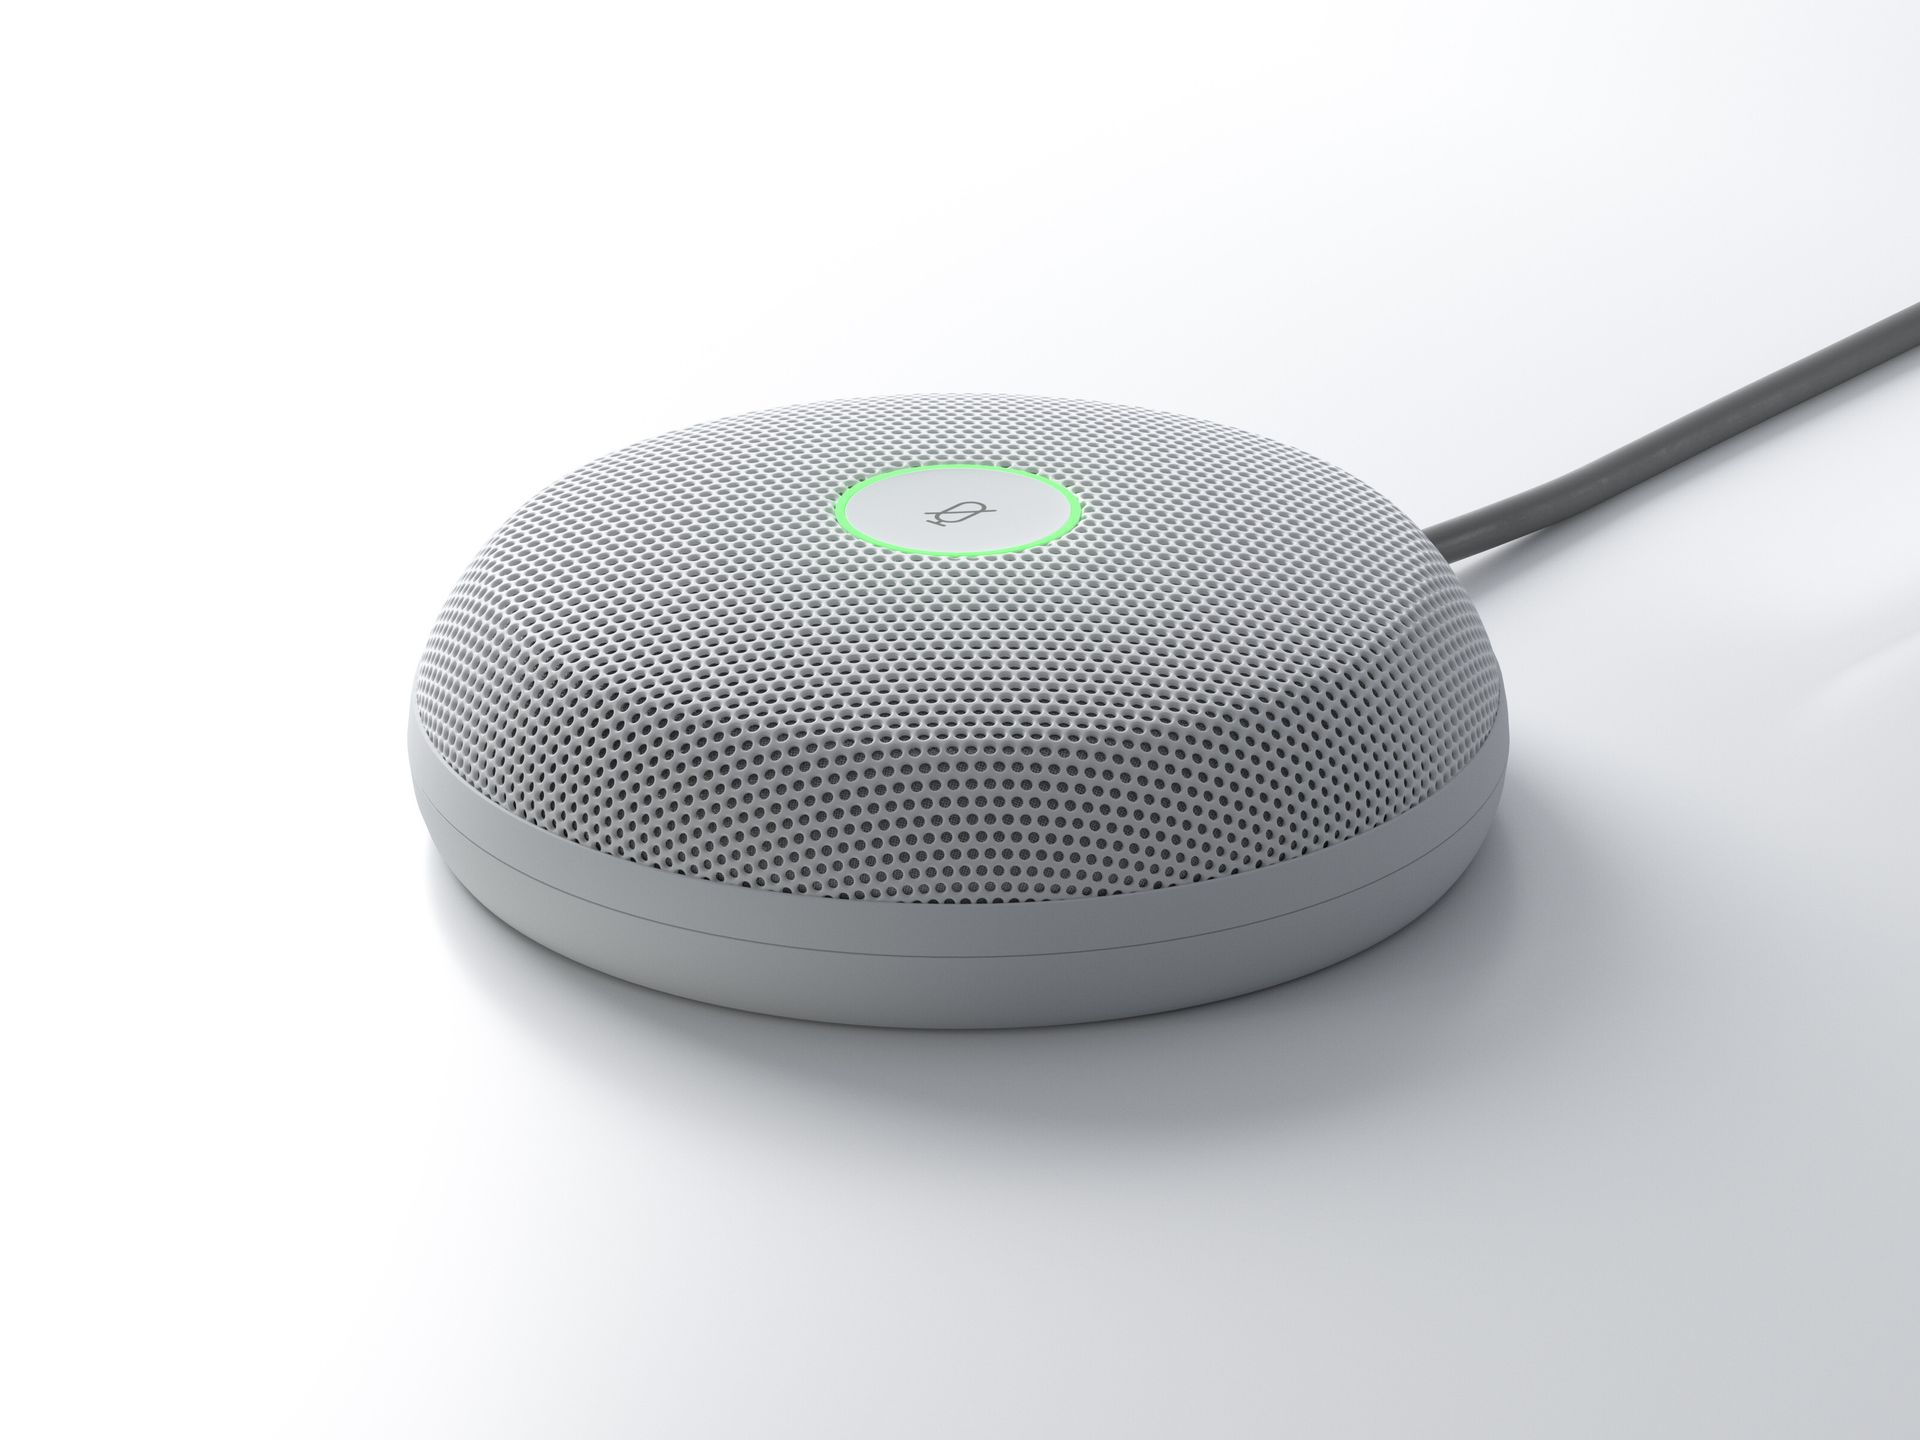 The Cisco Table Microphone Pro with a mute button in the center with a thin glowing green ring around it.